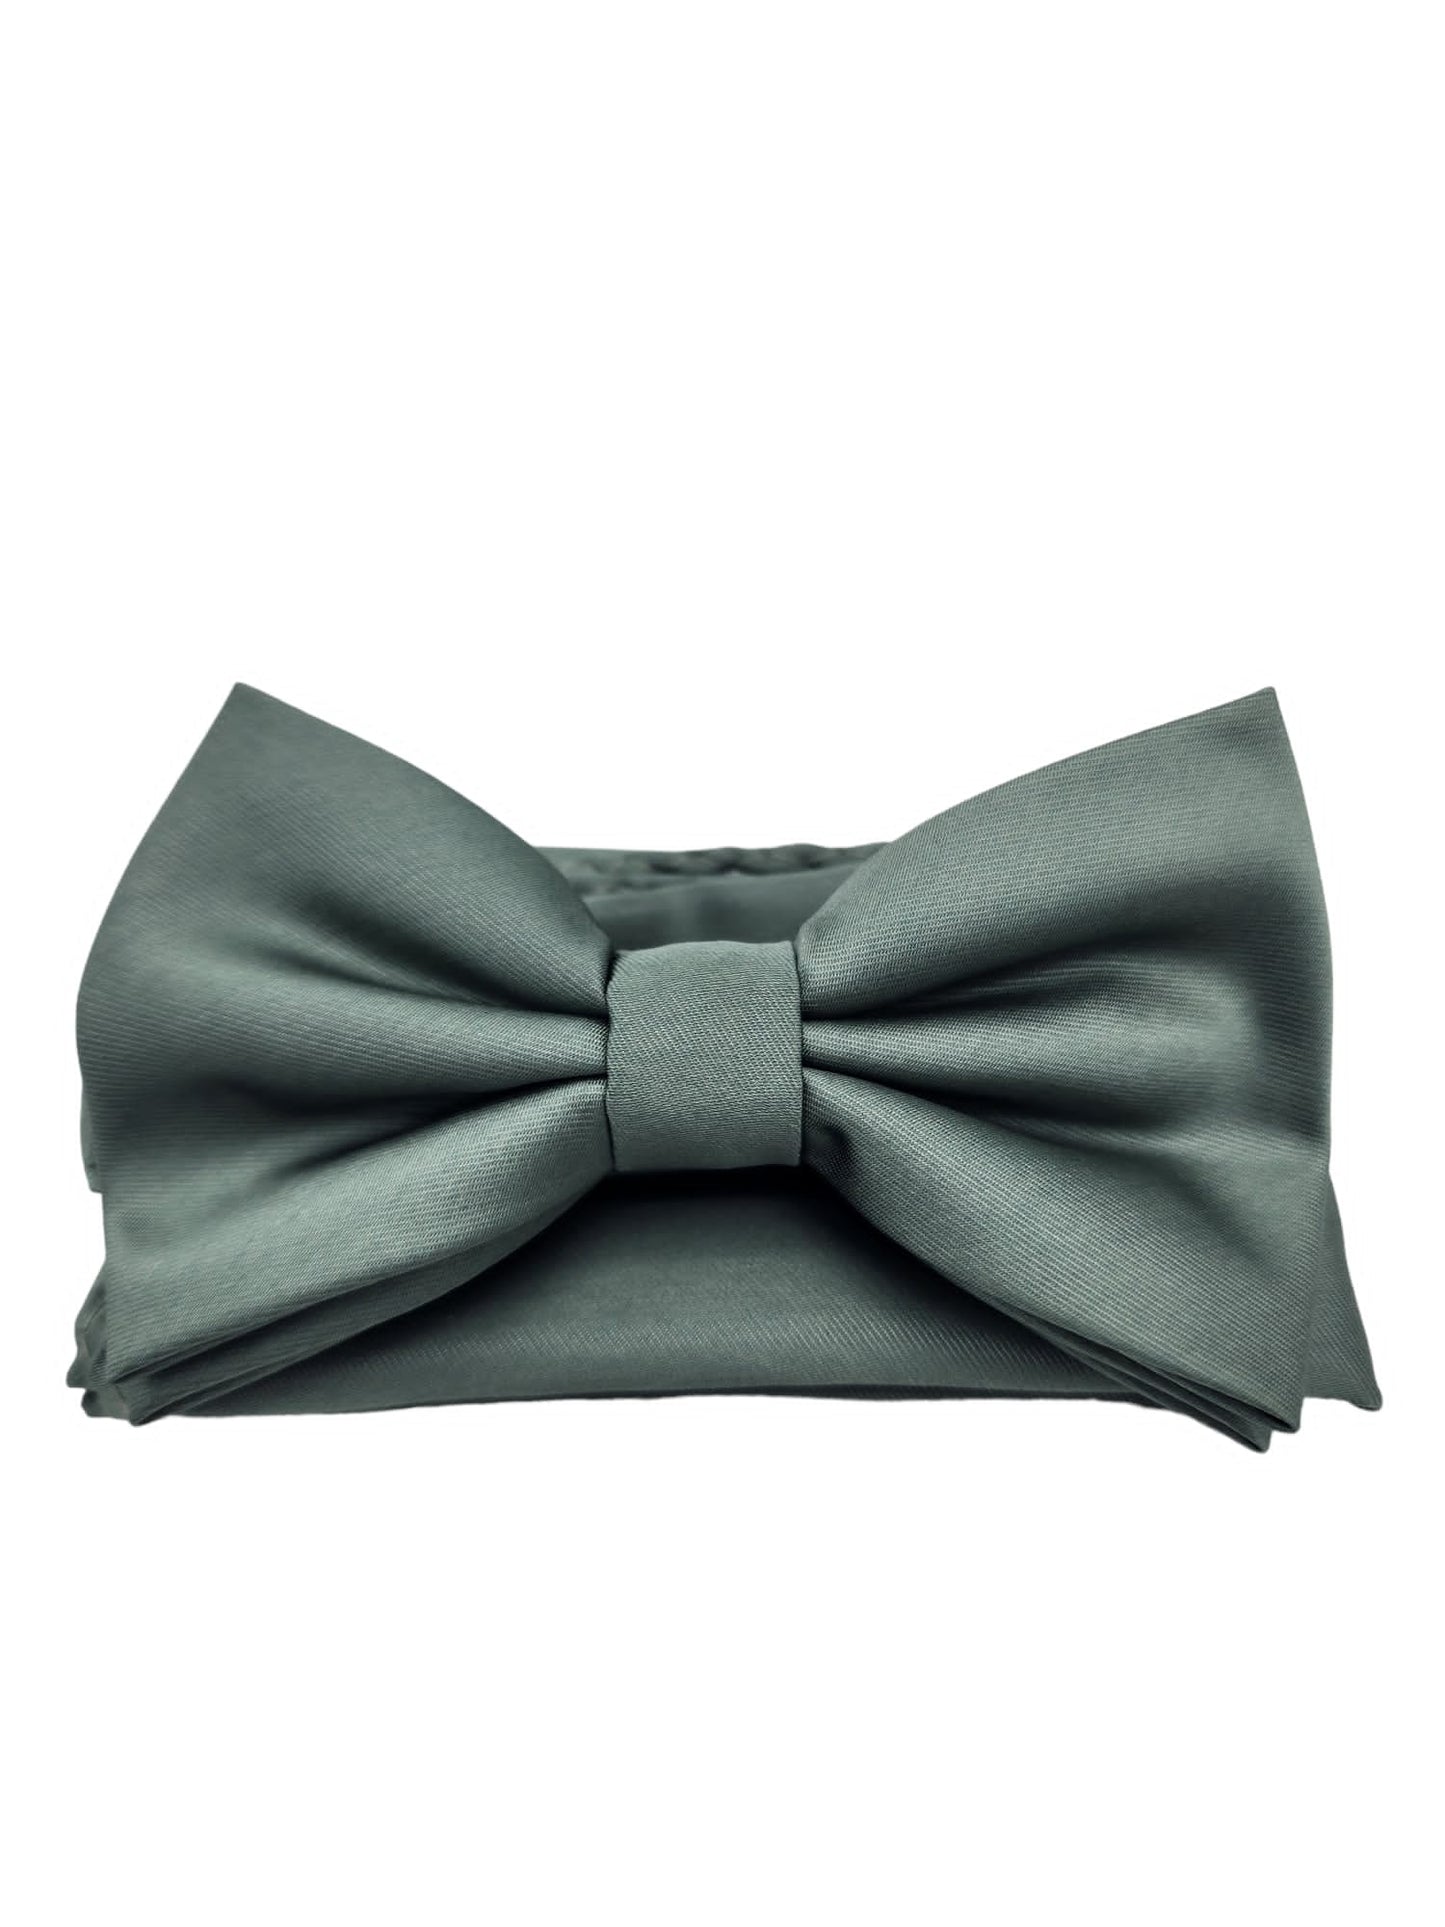 Giovanni Testi Classic Sage Bow Tie with Hanky BT100-PPP